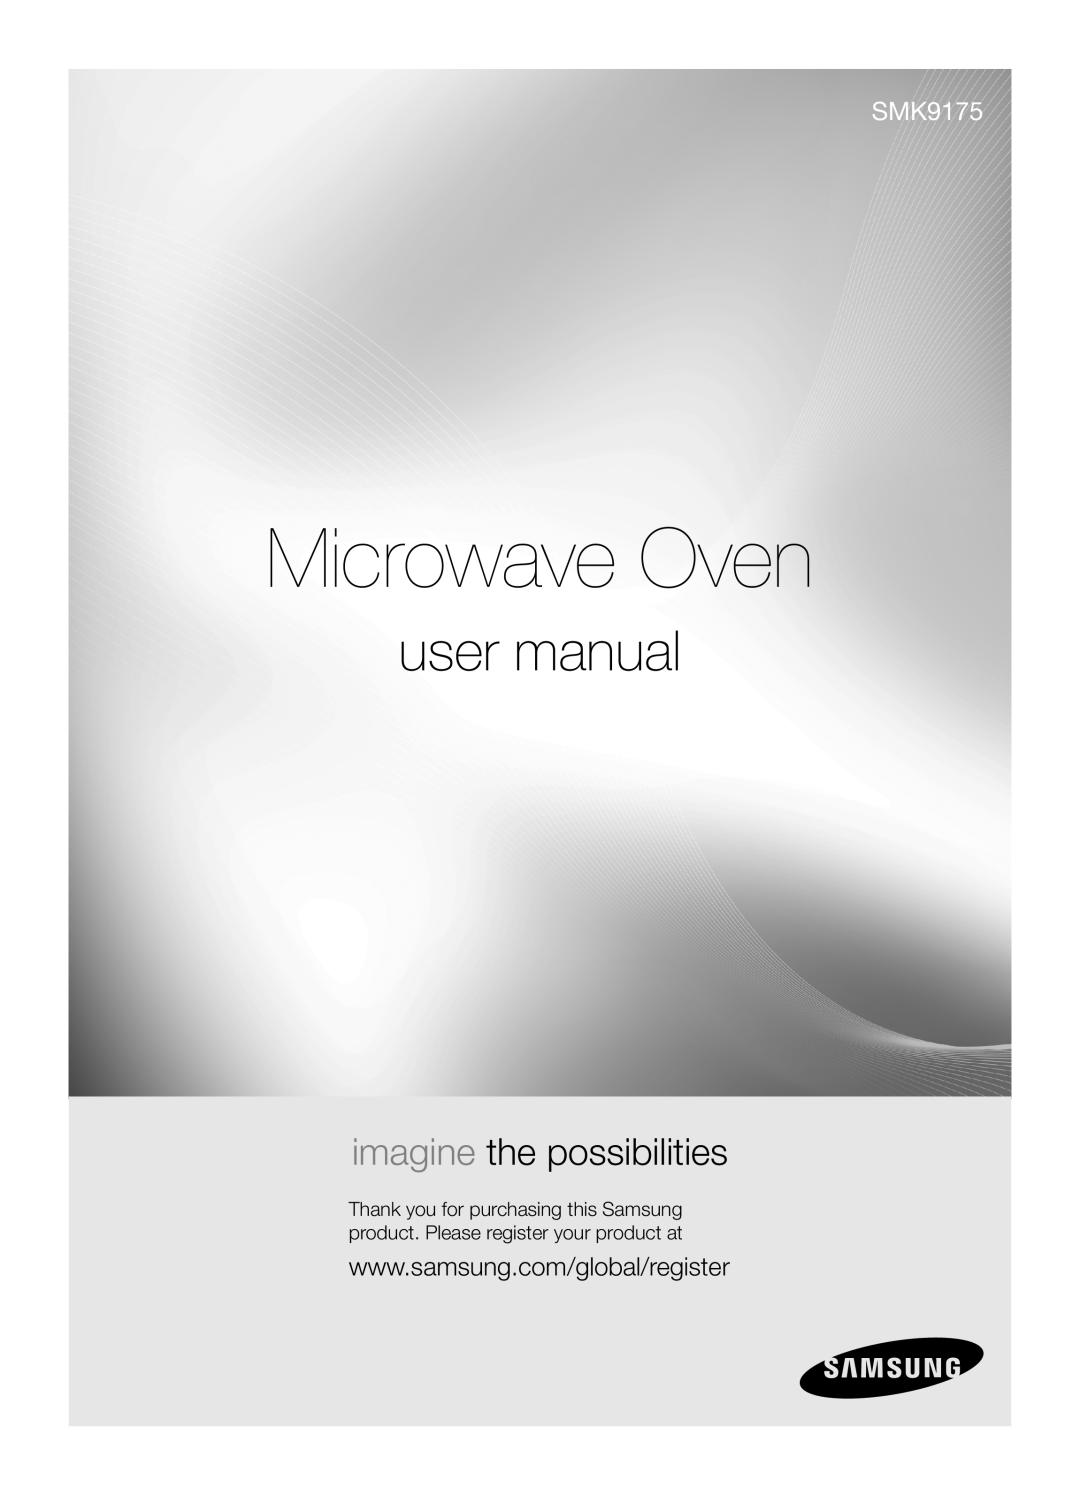 Samsung SMK9175ST user manual Microwave Oven, imagine the possibilities 